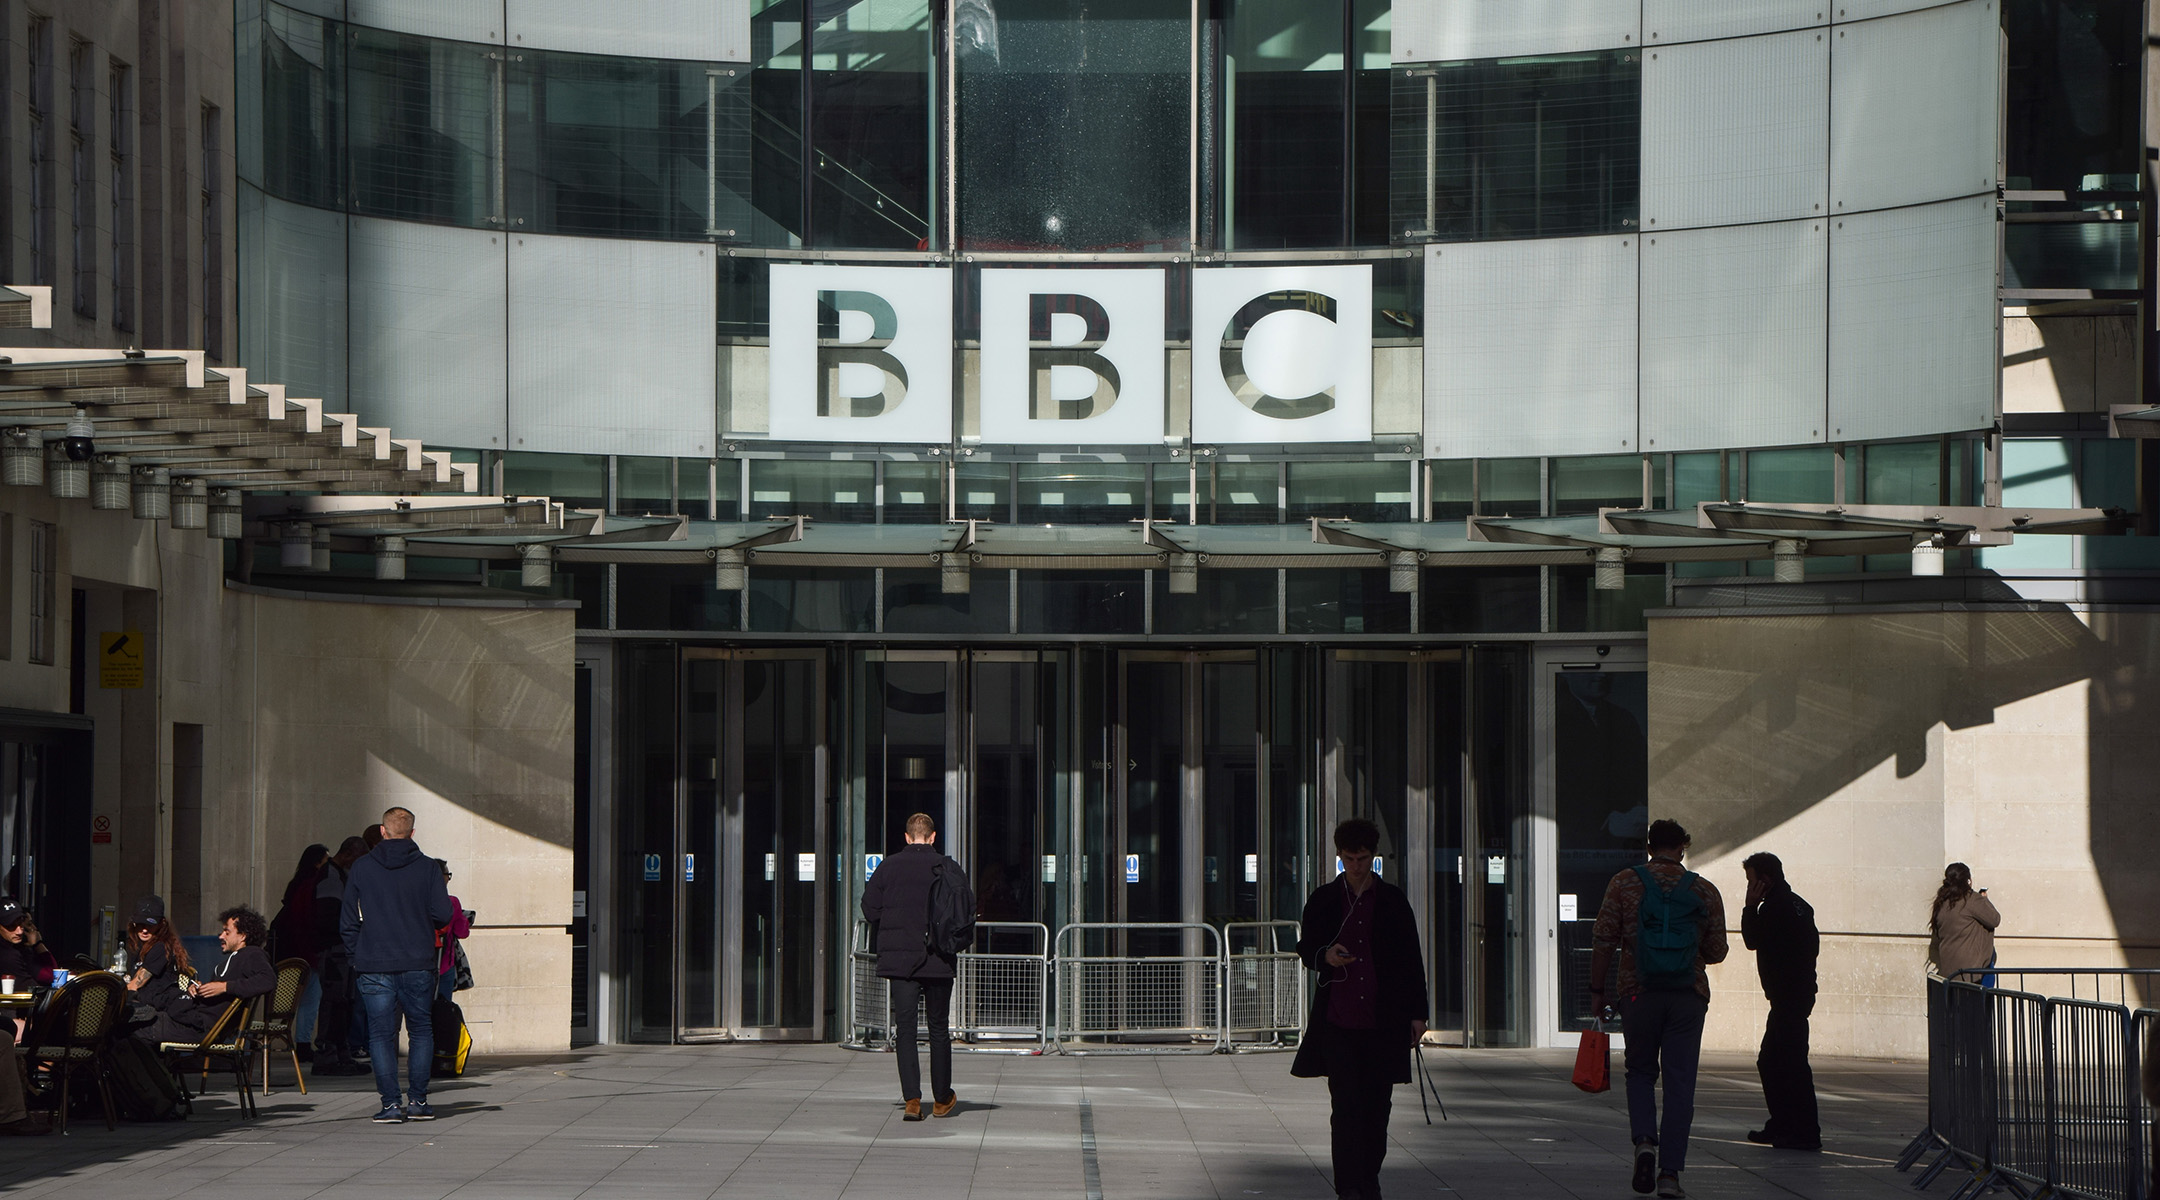 The BBC headquarters is located in London. (Vuk Valcic/SOPA Images/LightRocket via Getty Images)